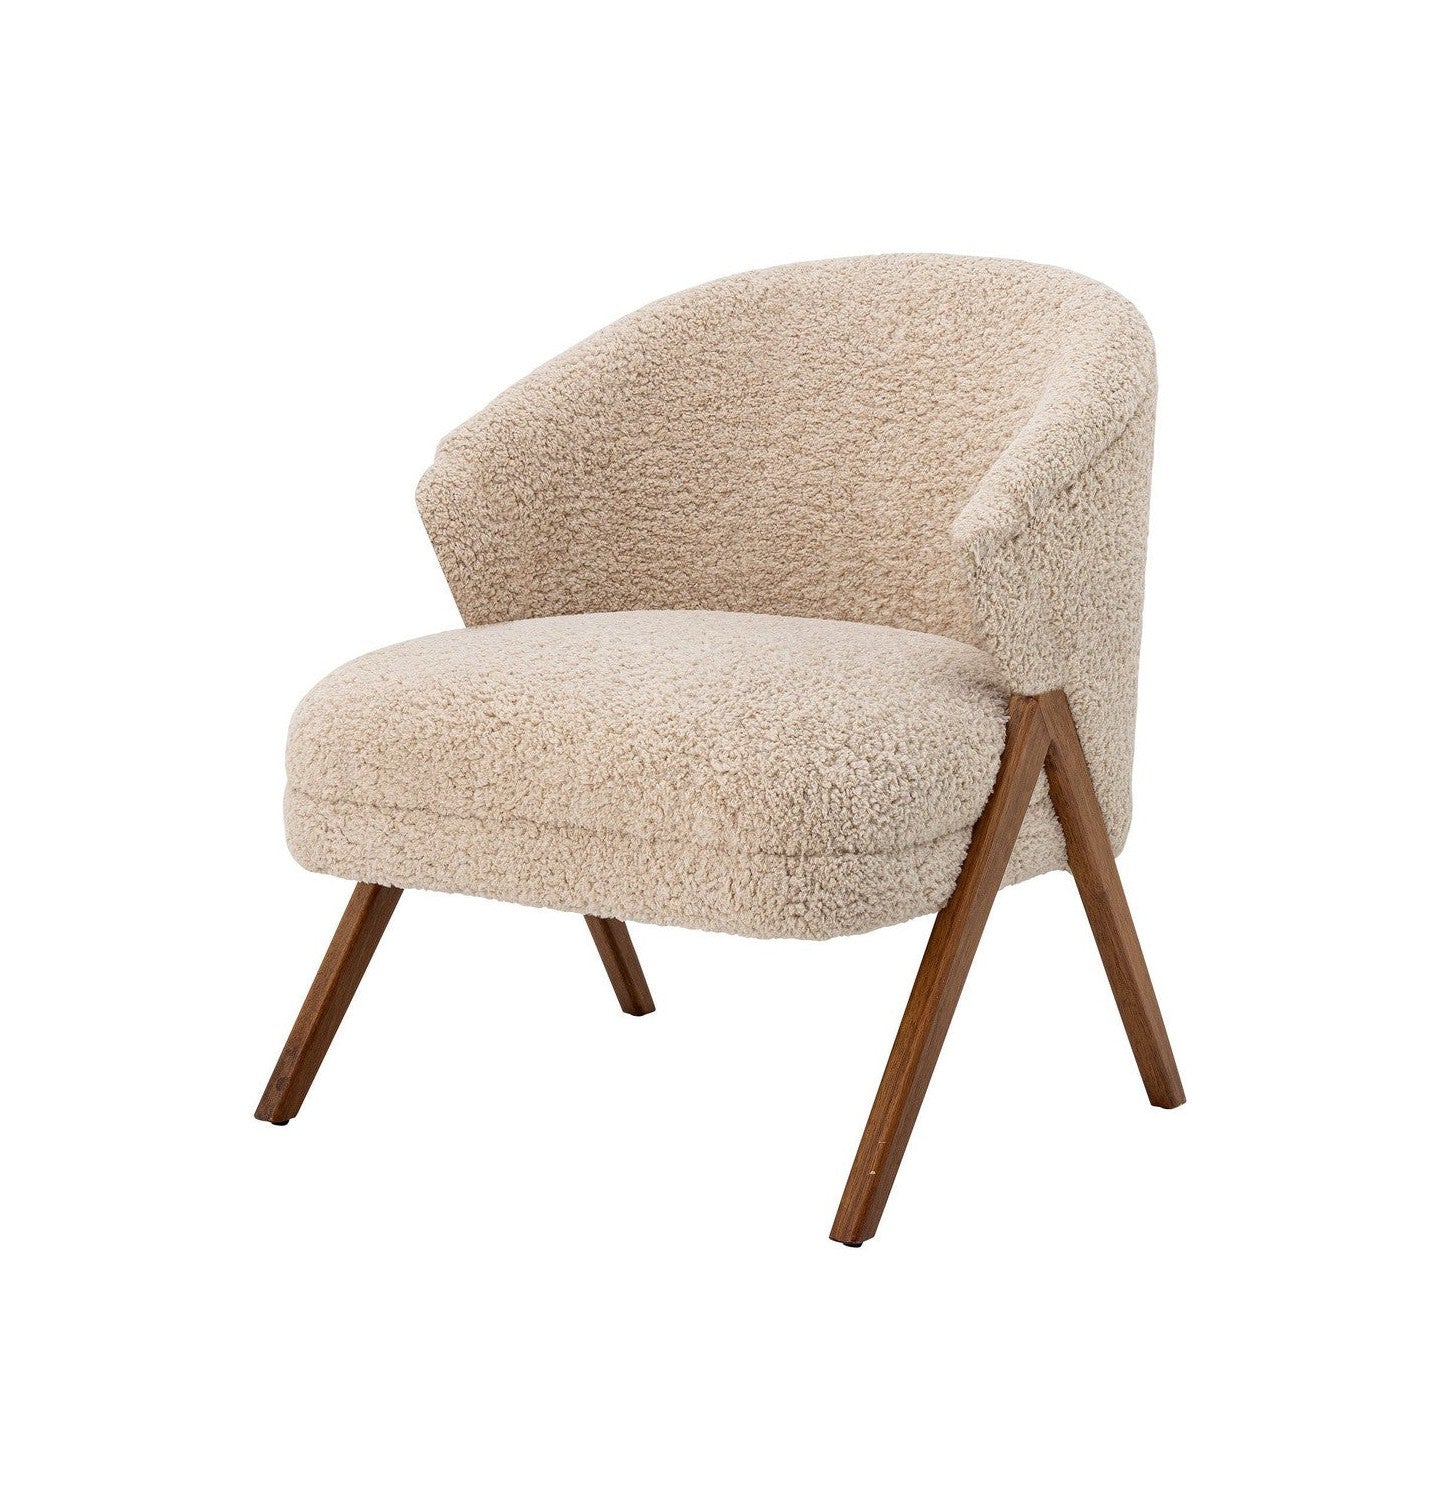 Bloomingville Camino Lounge Chair, Nature, Rubberwood